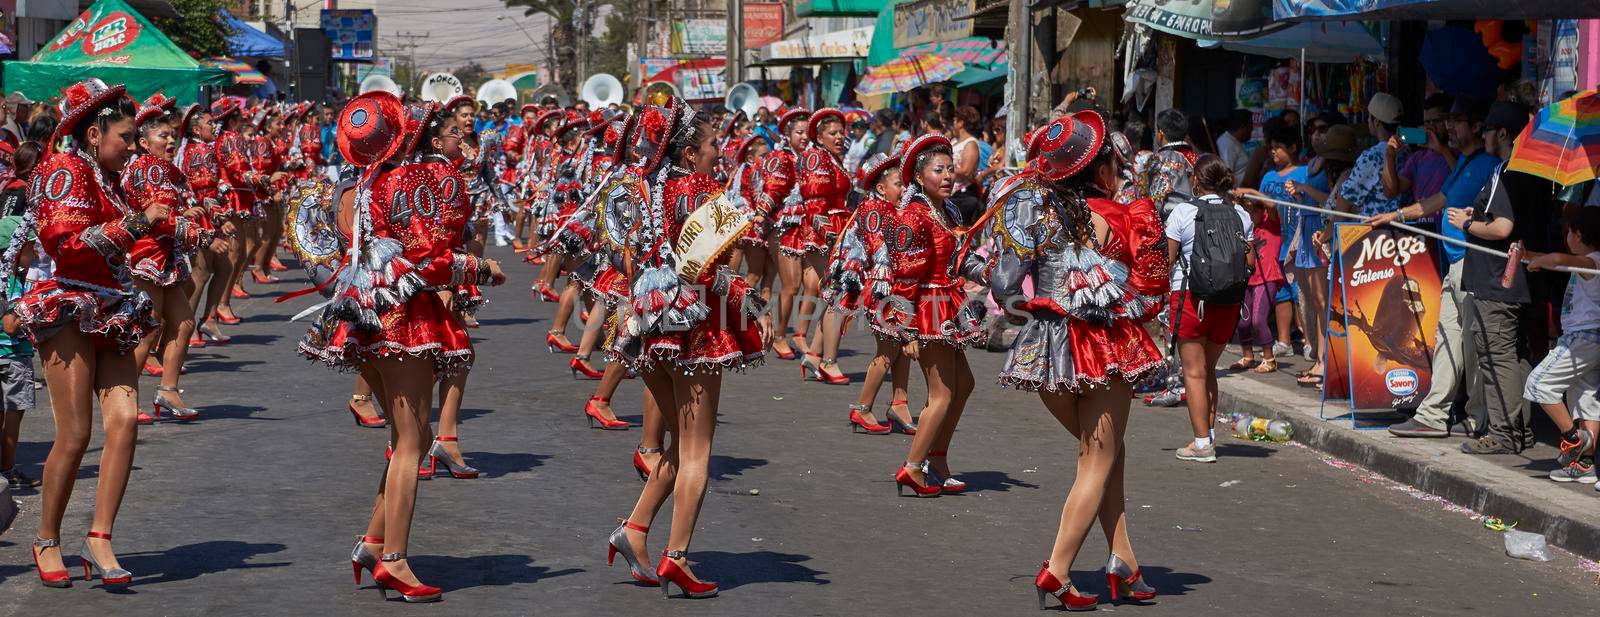 ARICA, CHILE - JANUARY 22, 2016: Caporales dance group performing at the annual Carnaval Andino con la Fuerza del Sol in Arica, Chile.